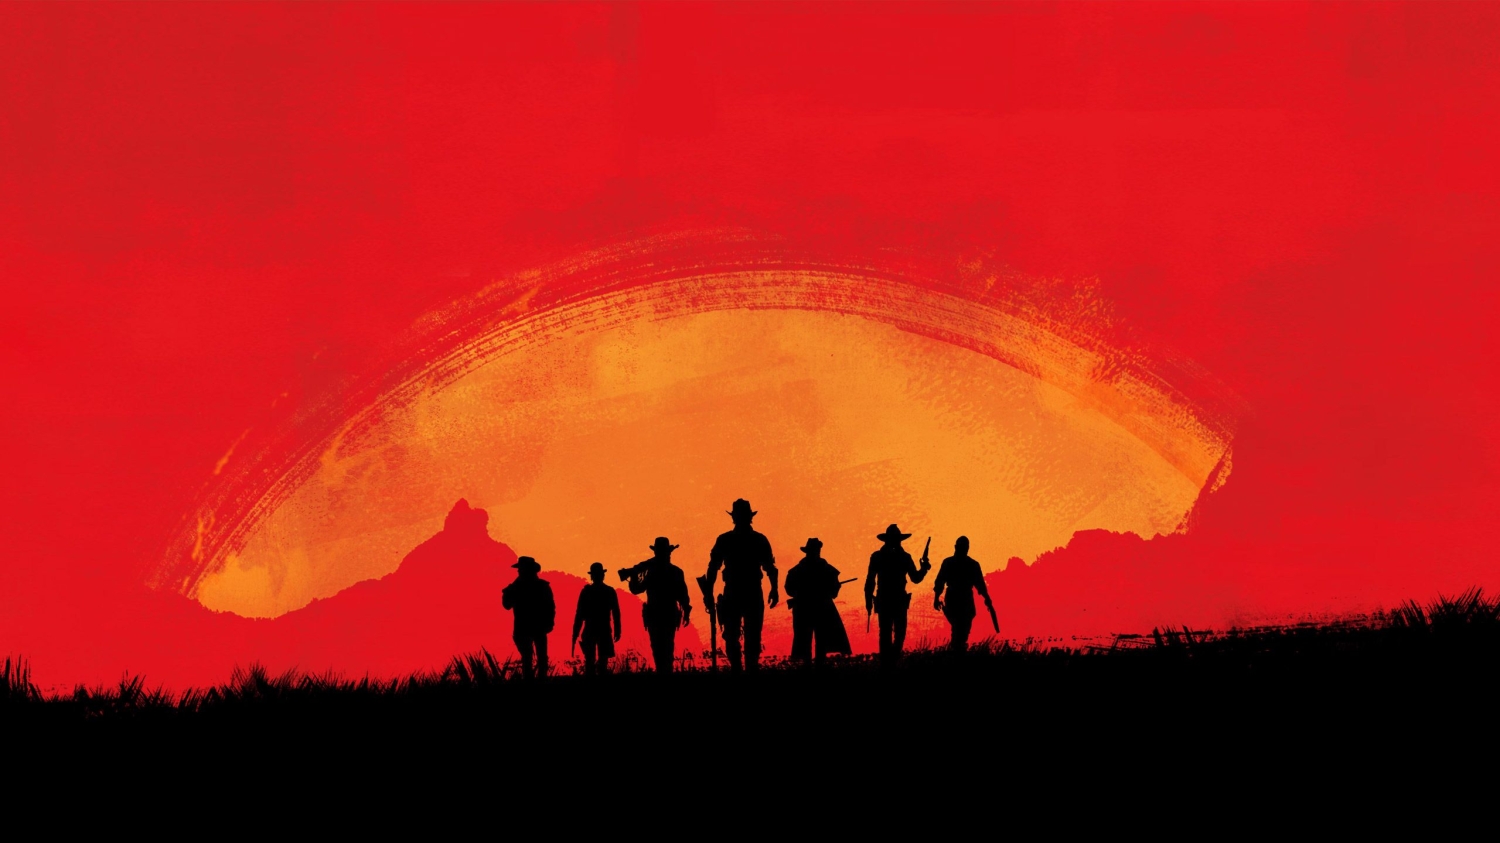 Red Dead Redemption 2: Is It Coming To PS5 or Xbox Series X